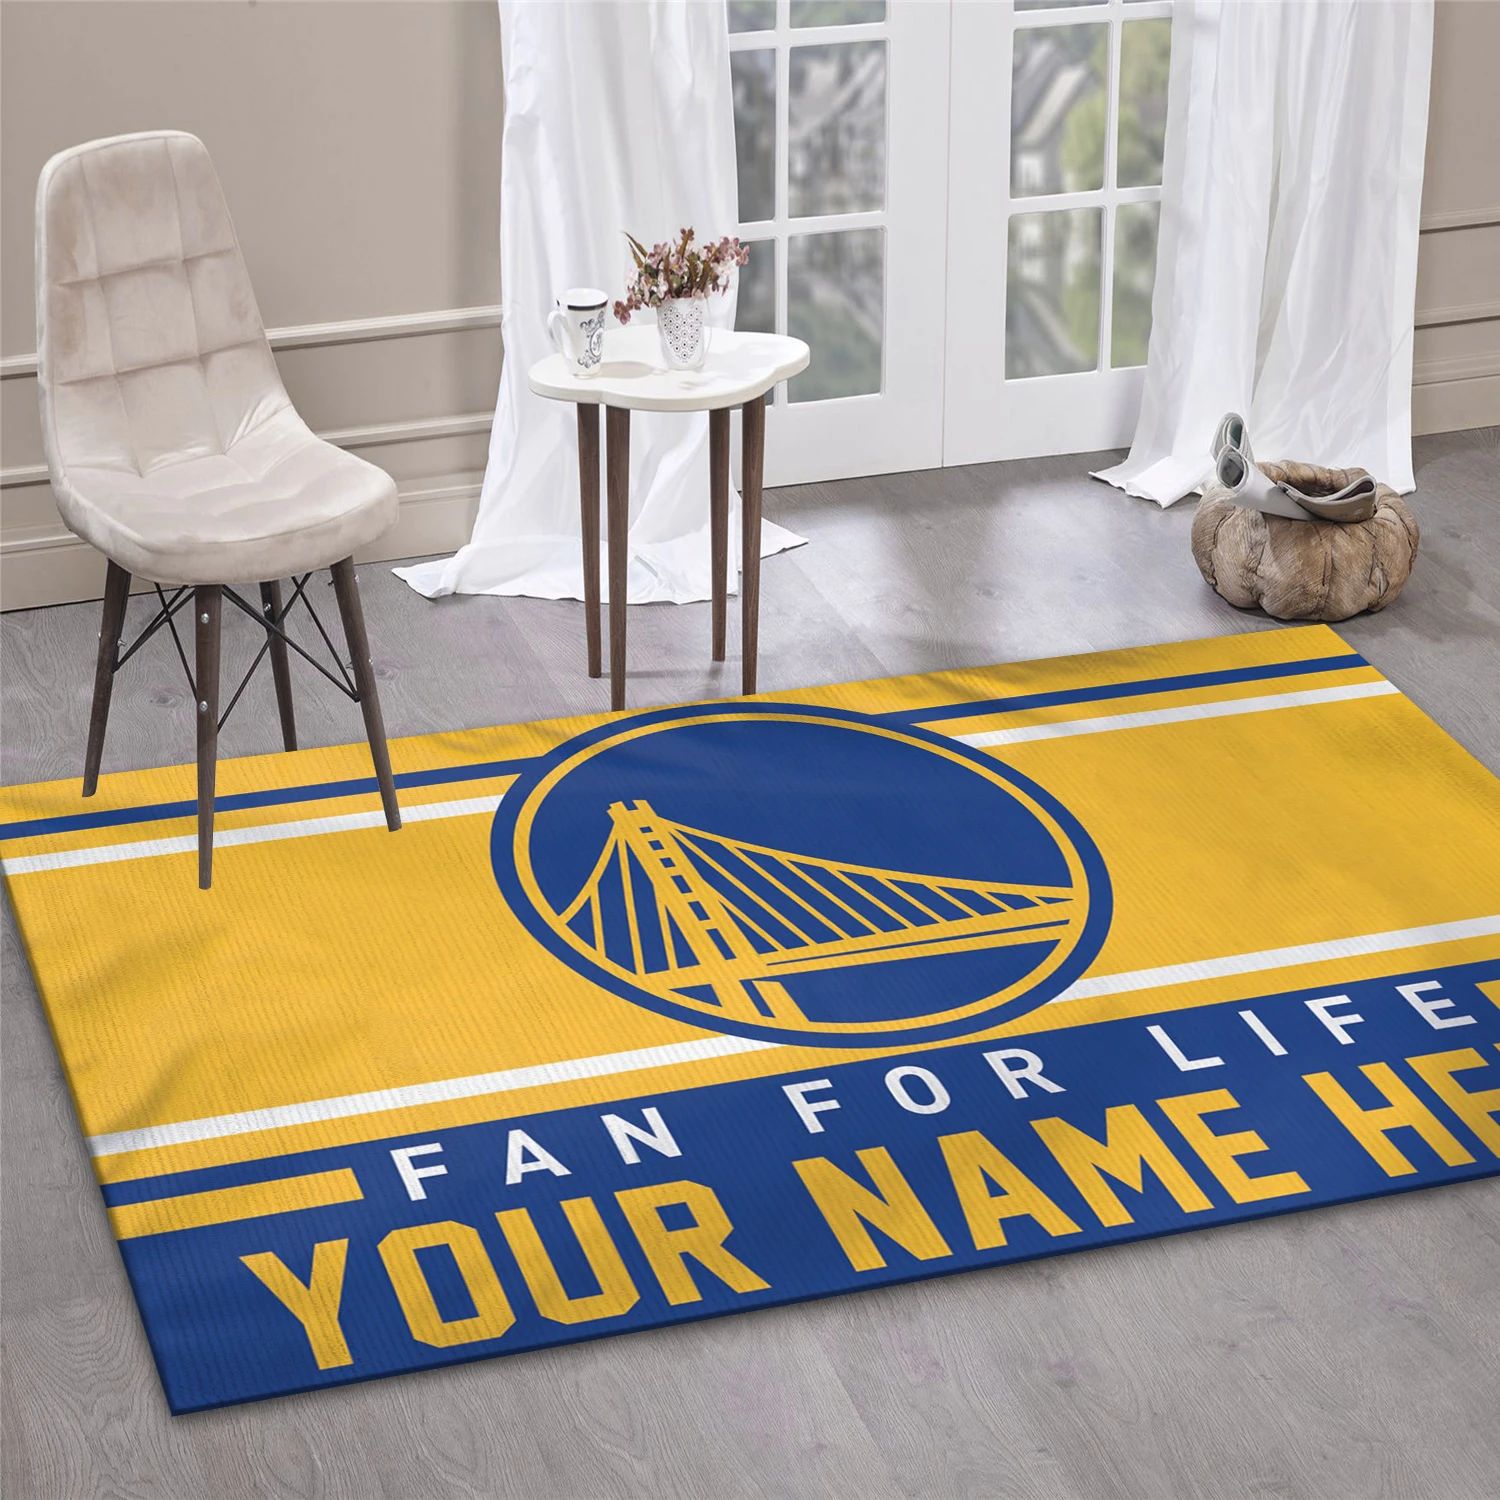 Golden State Warriors NBA Area Rug For Christmas, Living Room Rug - Home Decor - Indoor Outdoor Rugs